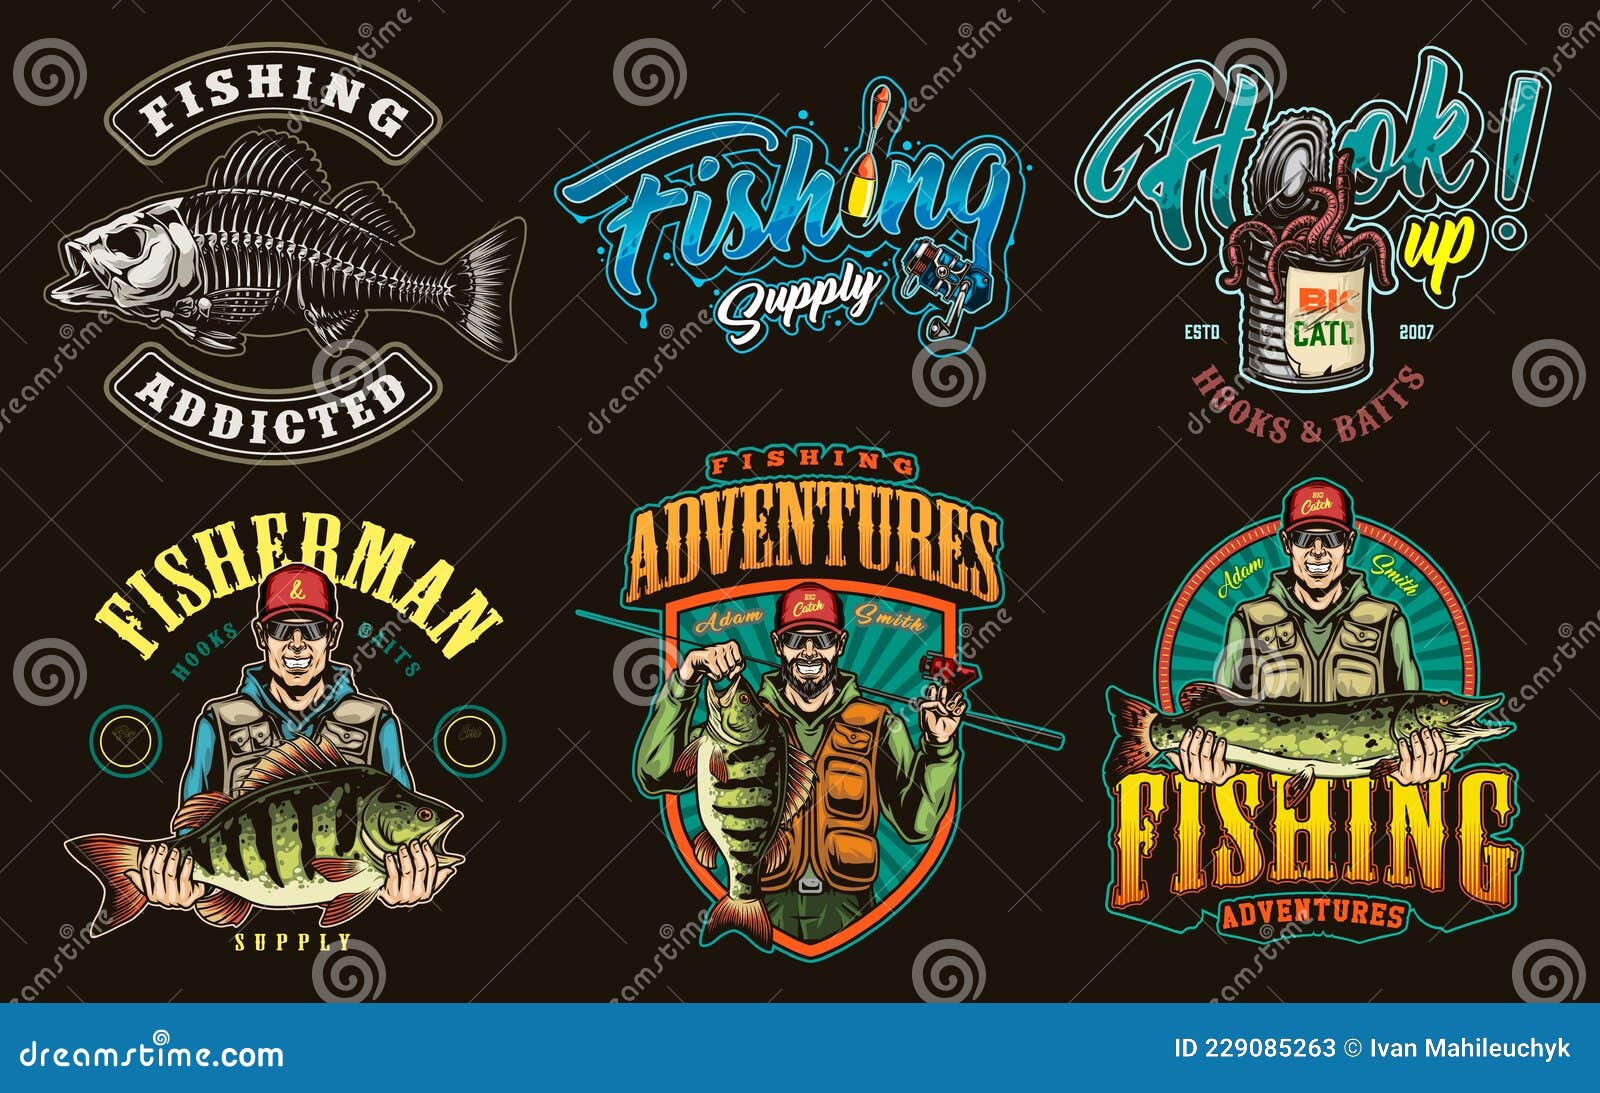 https://thumbs.dreamstime.com/z/colorful-vintage-fishing-prints-colorful-vintage-fishing-prints-perch-skeleton-aluminum-can-full-worms-fishing-float-229085263.jpg